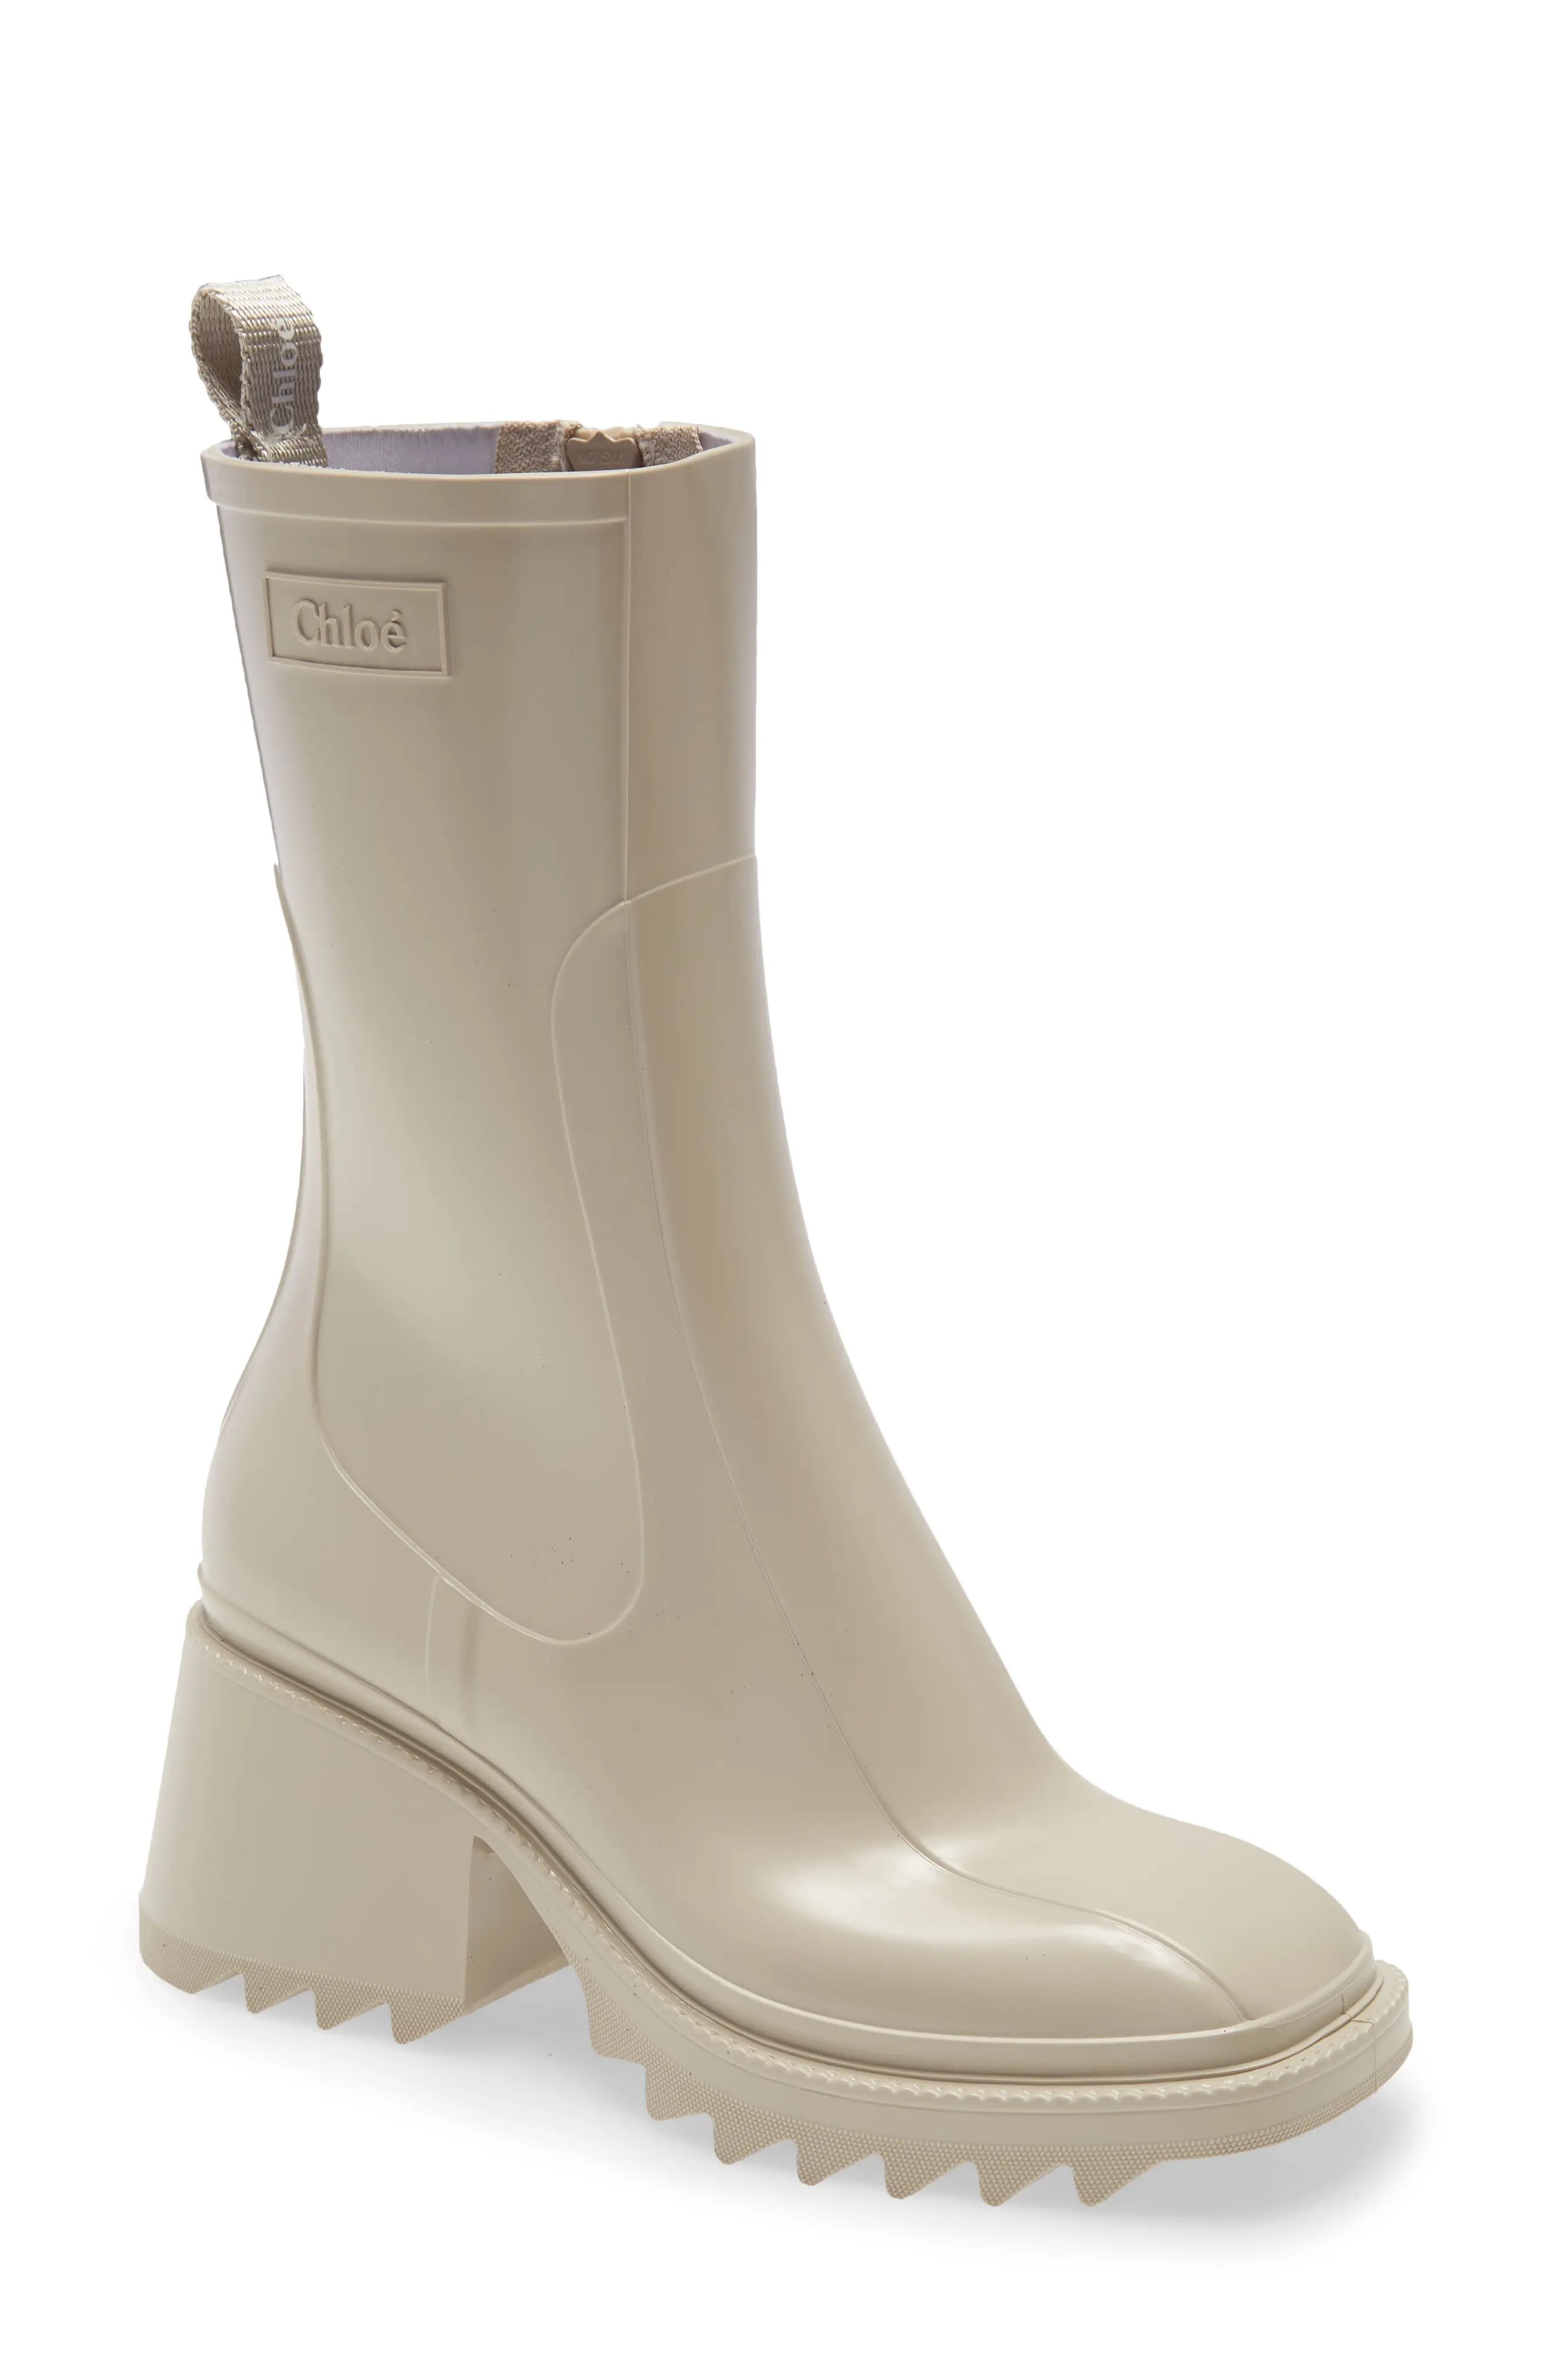 Chloe Betty Rain Boot, Size 8Us in Nomad Beige at Nordstrom | Nordstrom